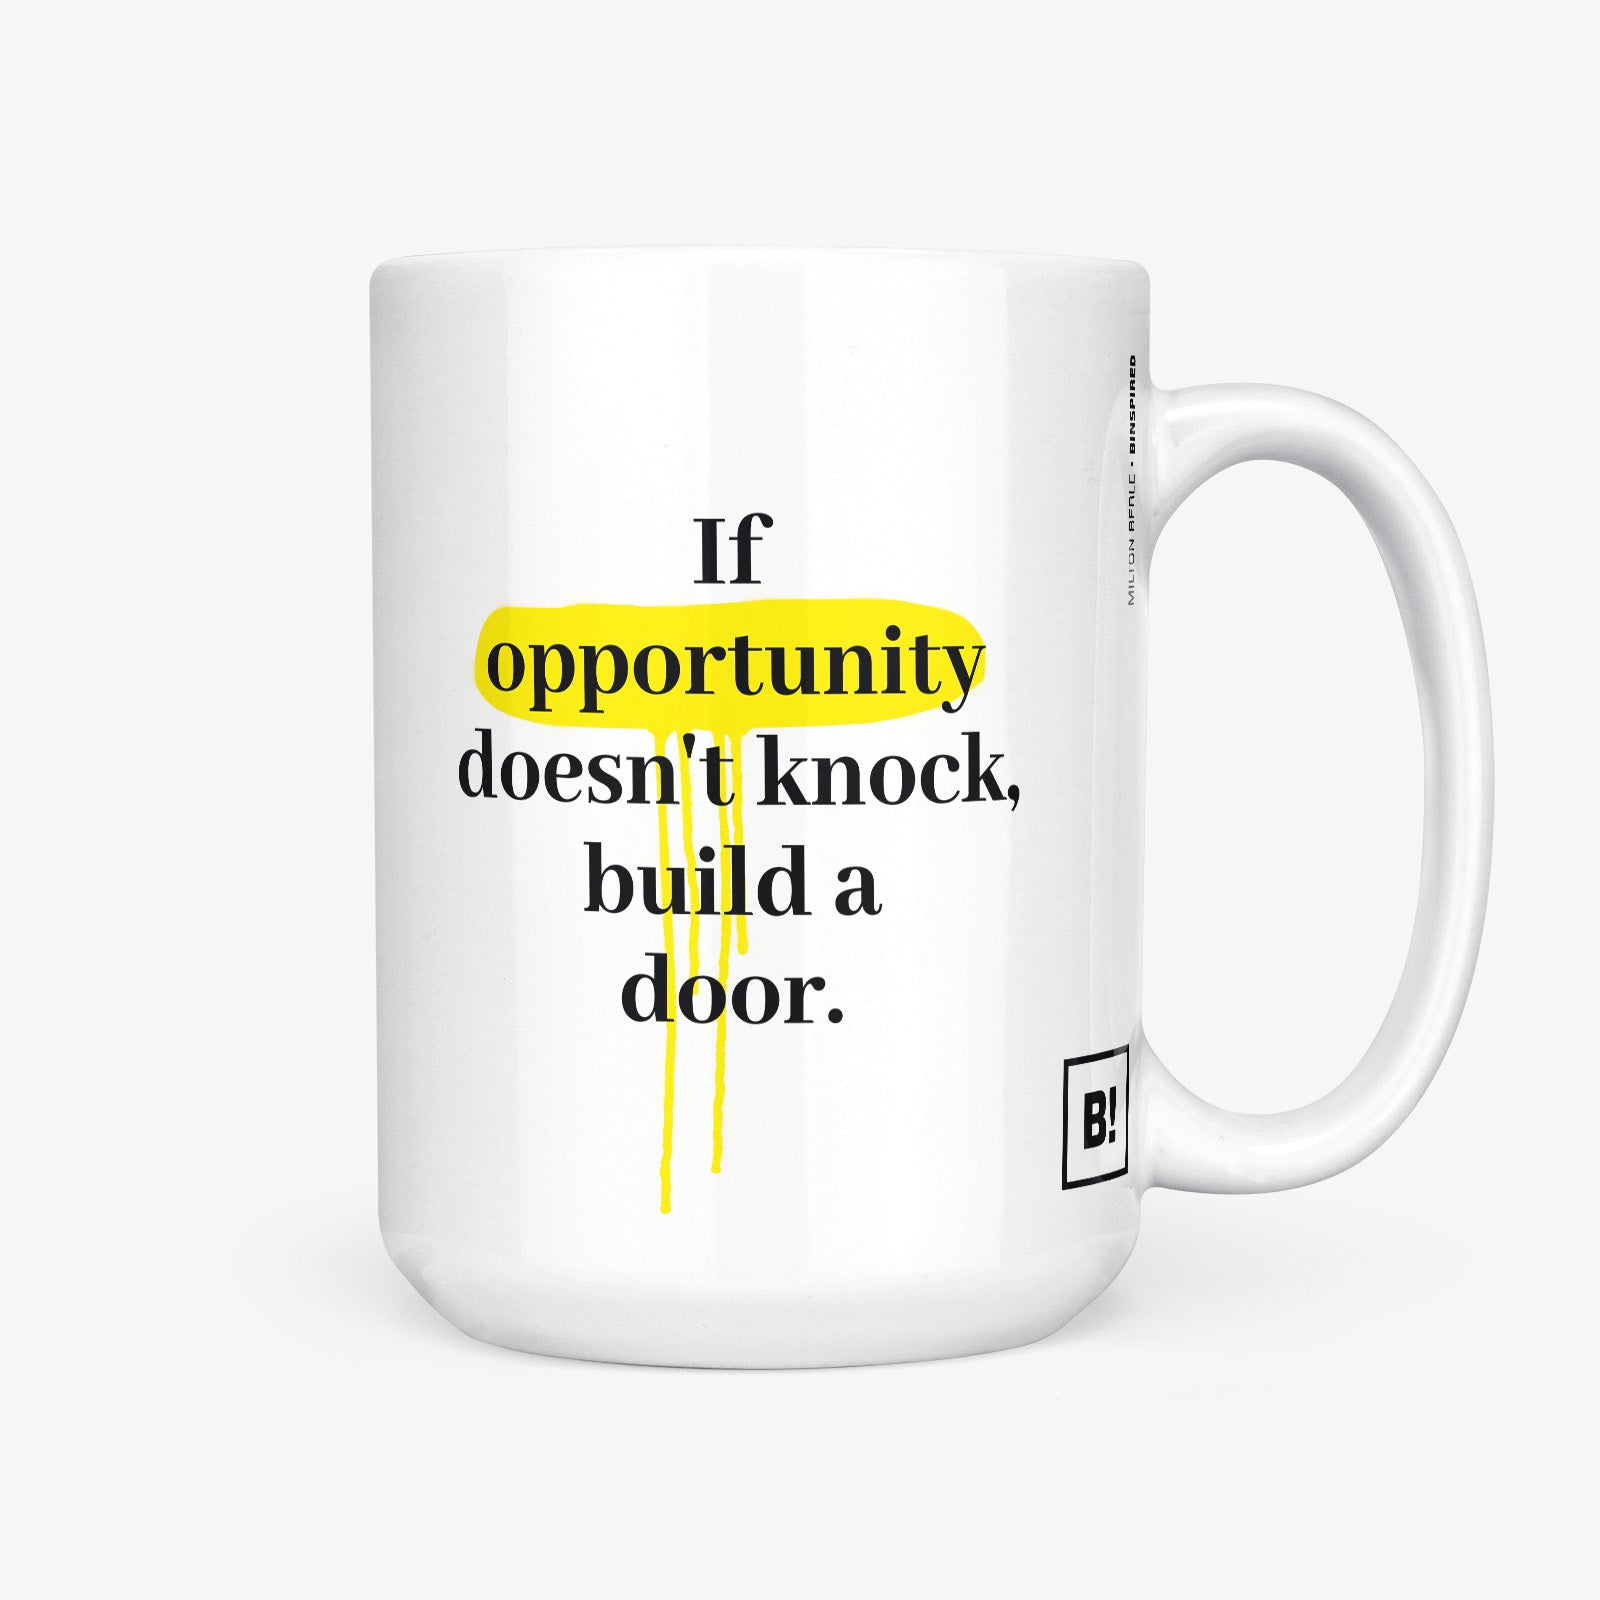 Be inspired by Milton Berle's famous quote, "If opportunity doesn't knock, build a door" on this white and glossy 15oz coffee mug with the handle on the right.